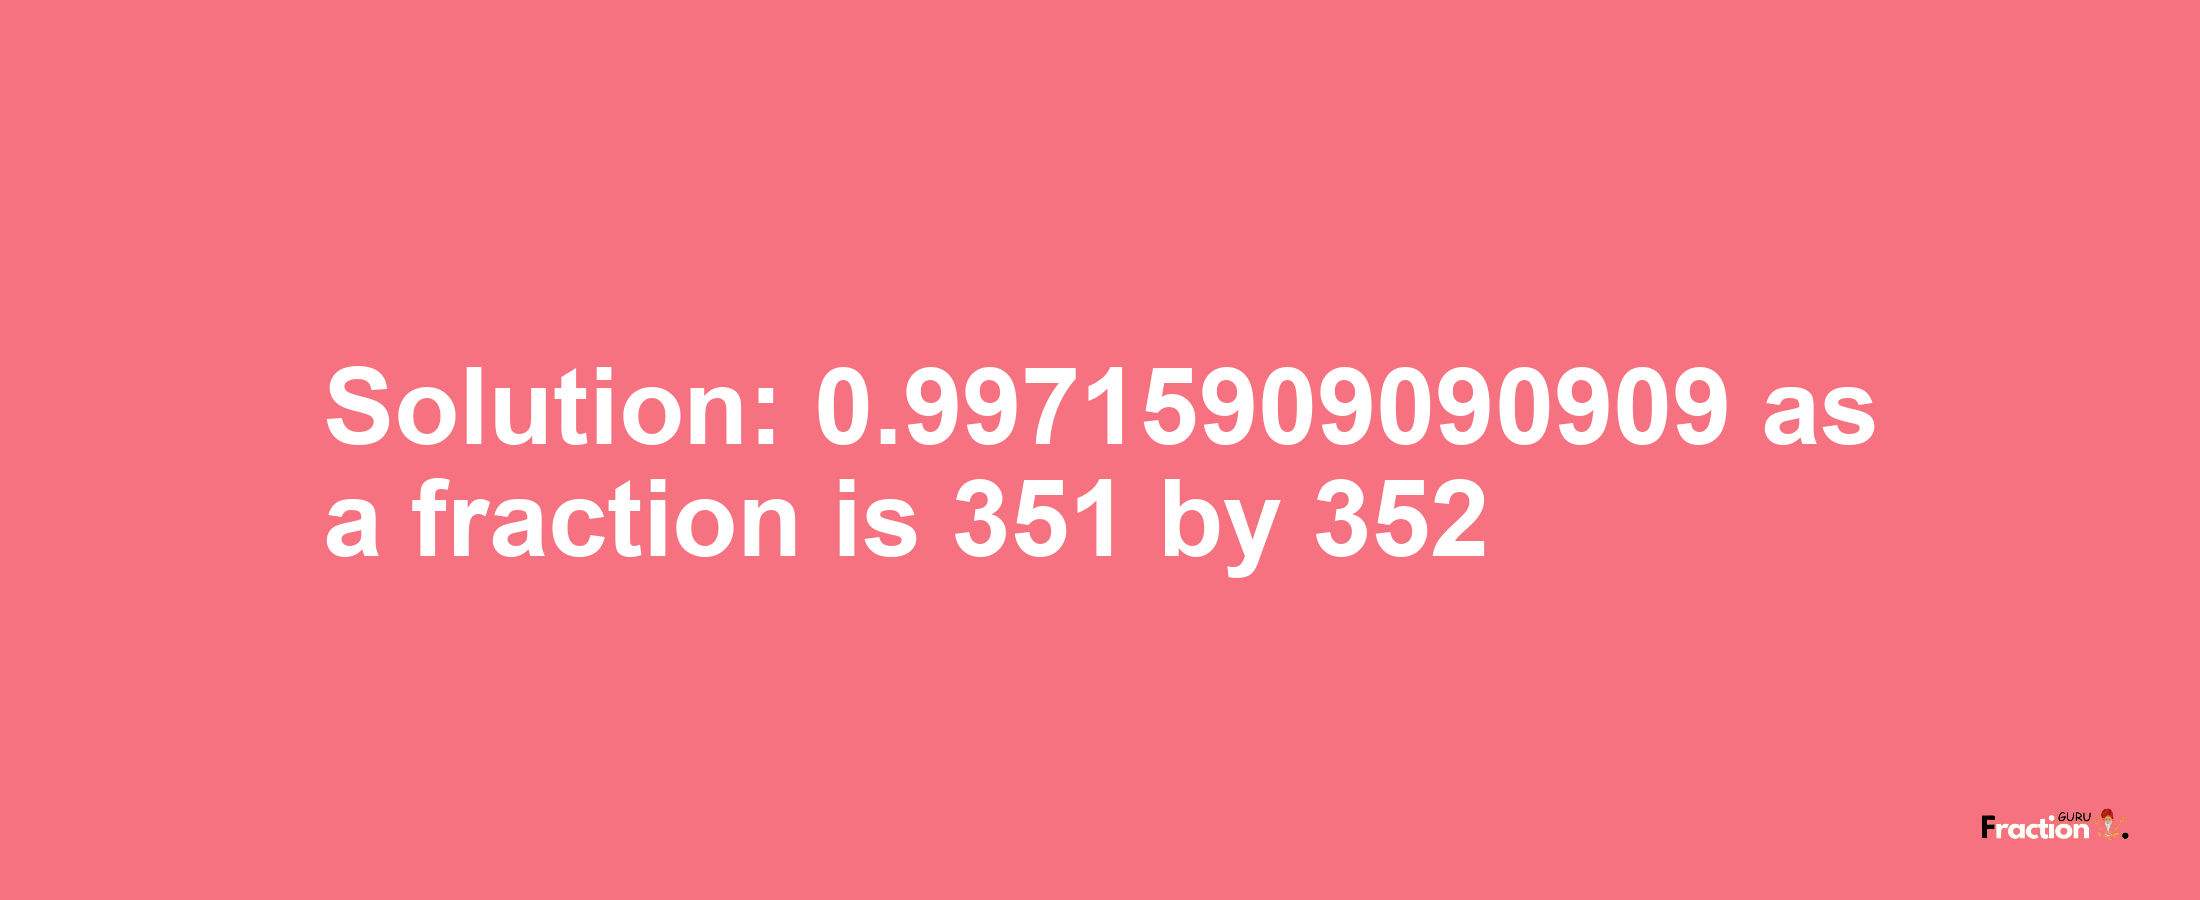 Solution:0.99715909090909 as a fraction is 351/352